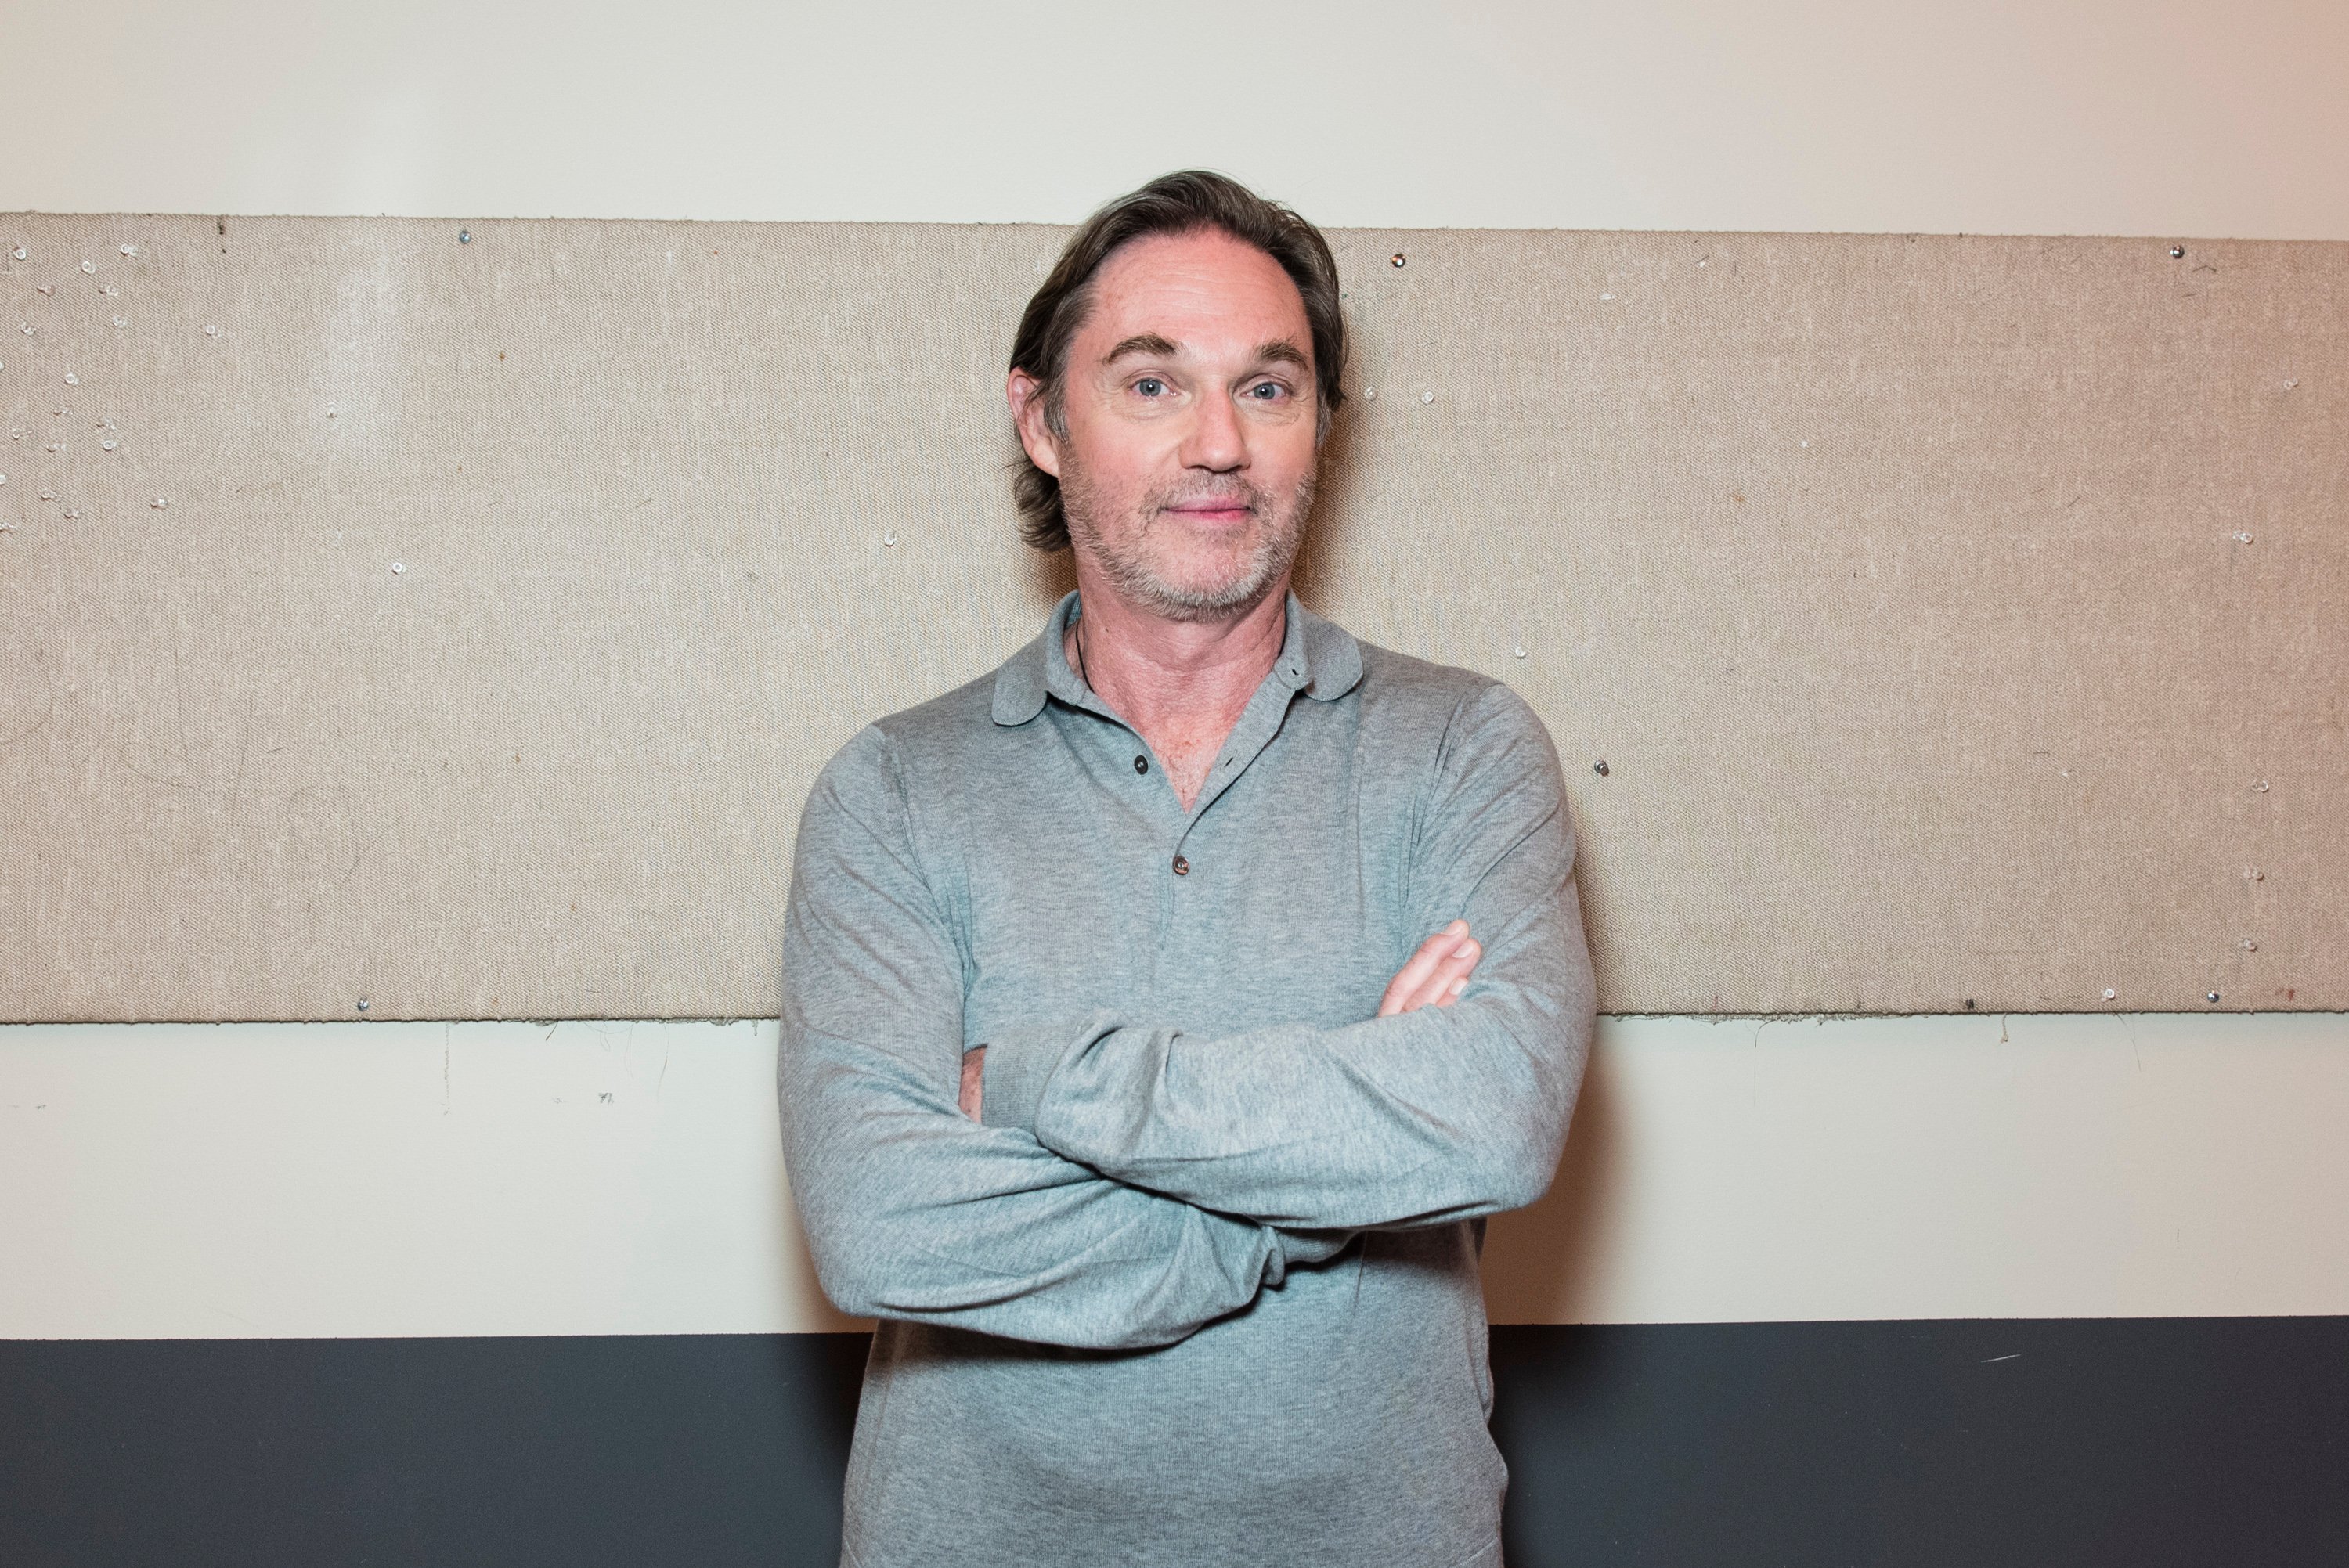 Actor Richard Thomas standing in front of a gray wall